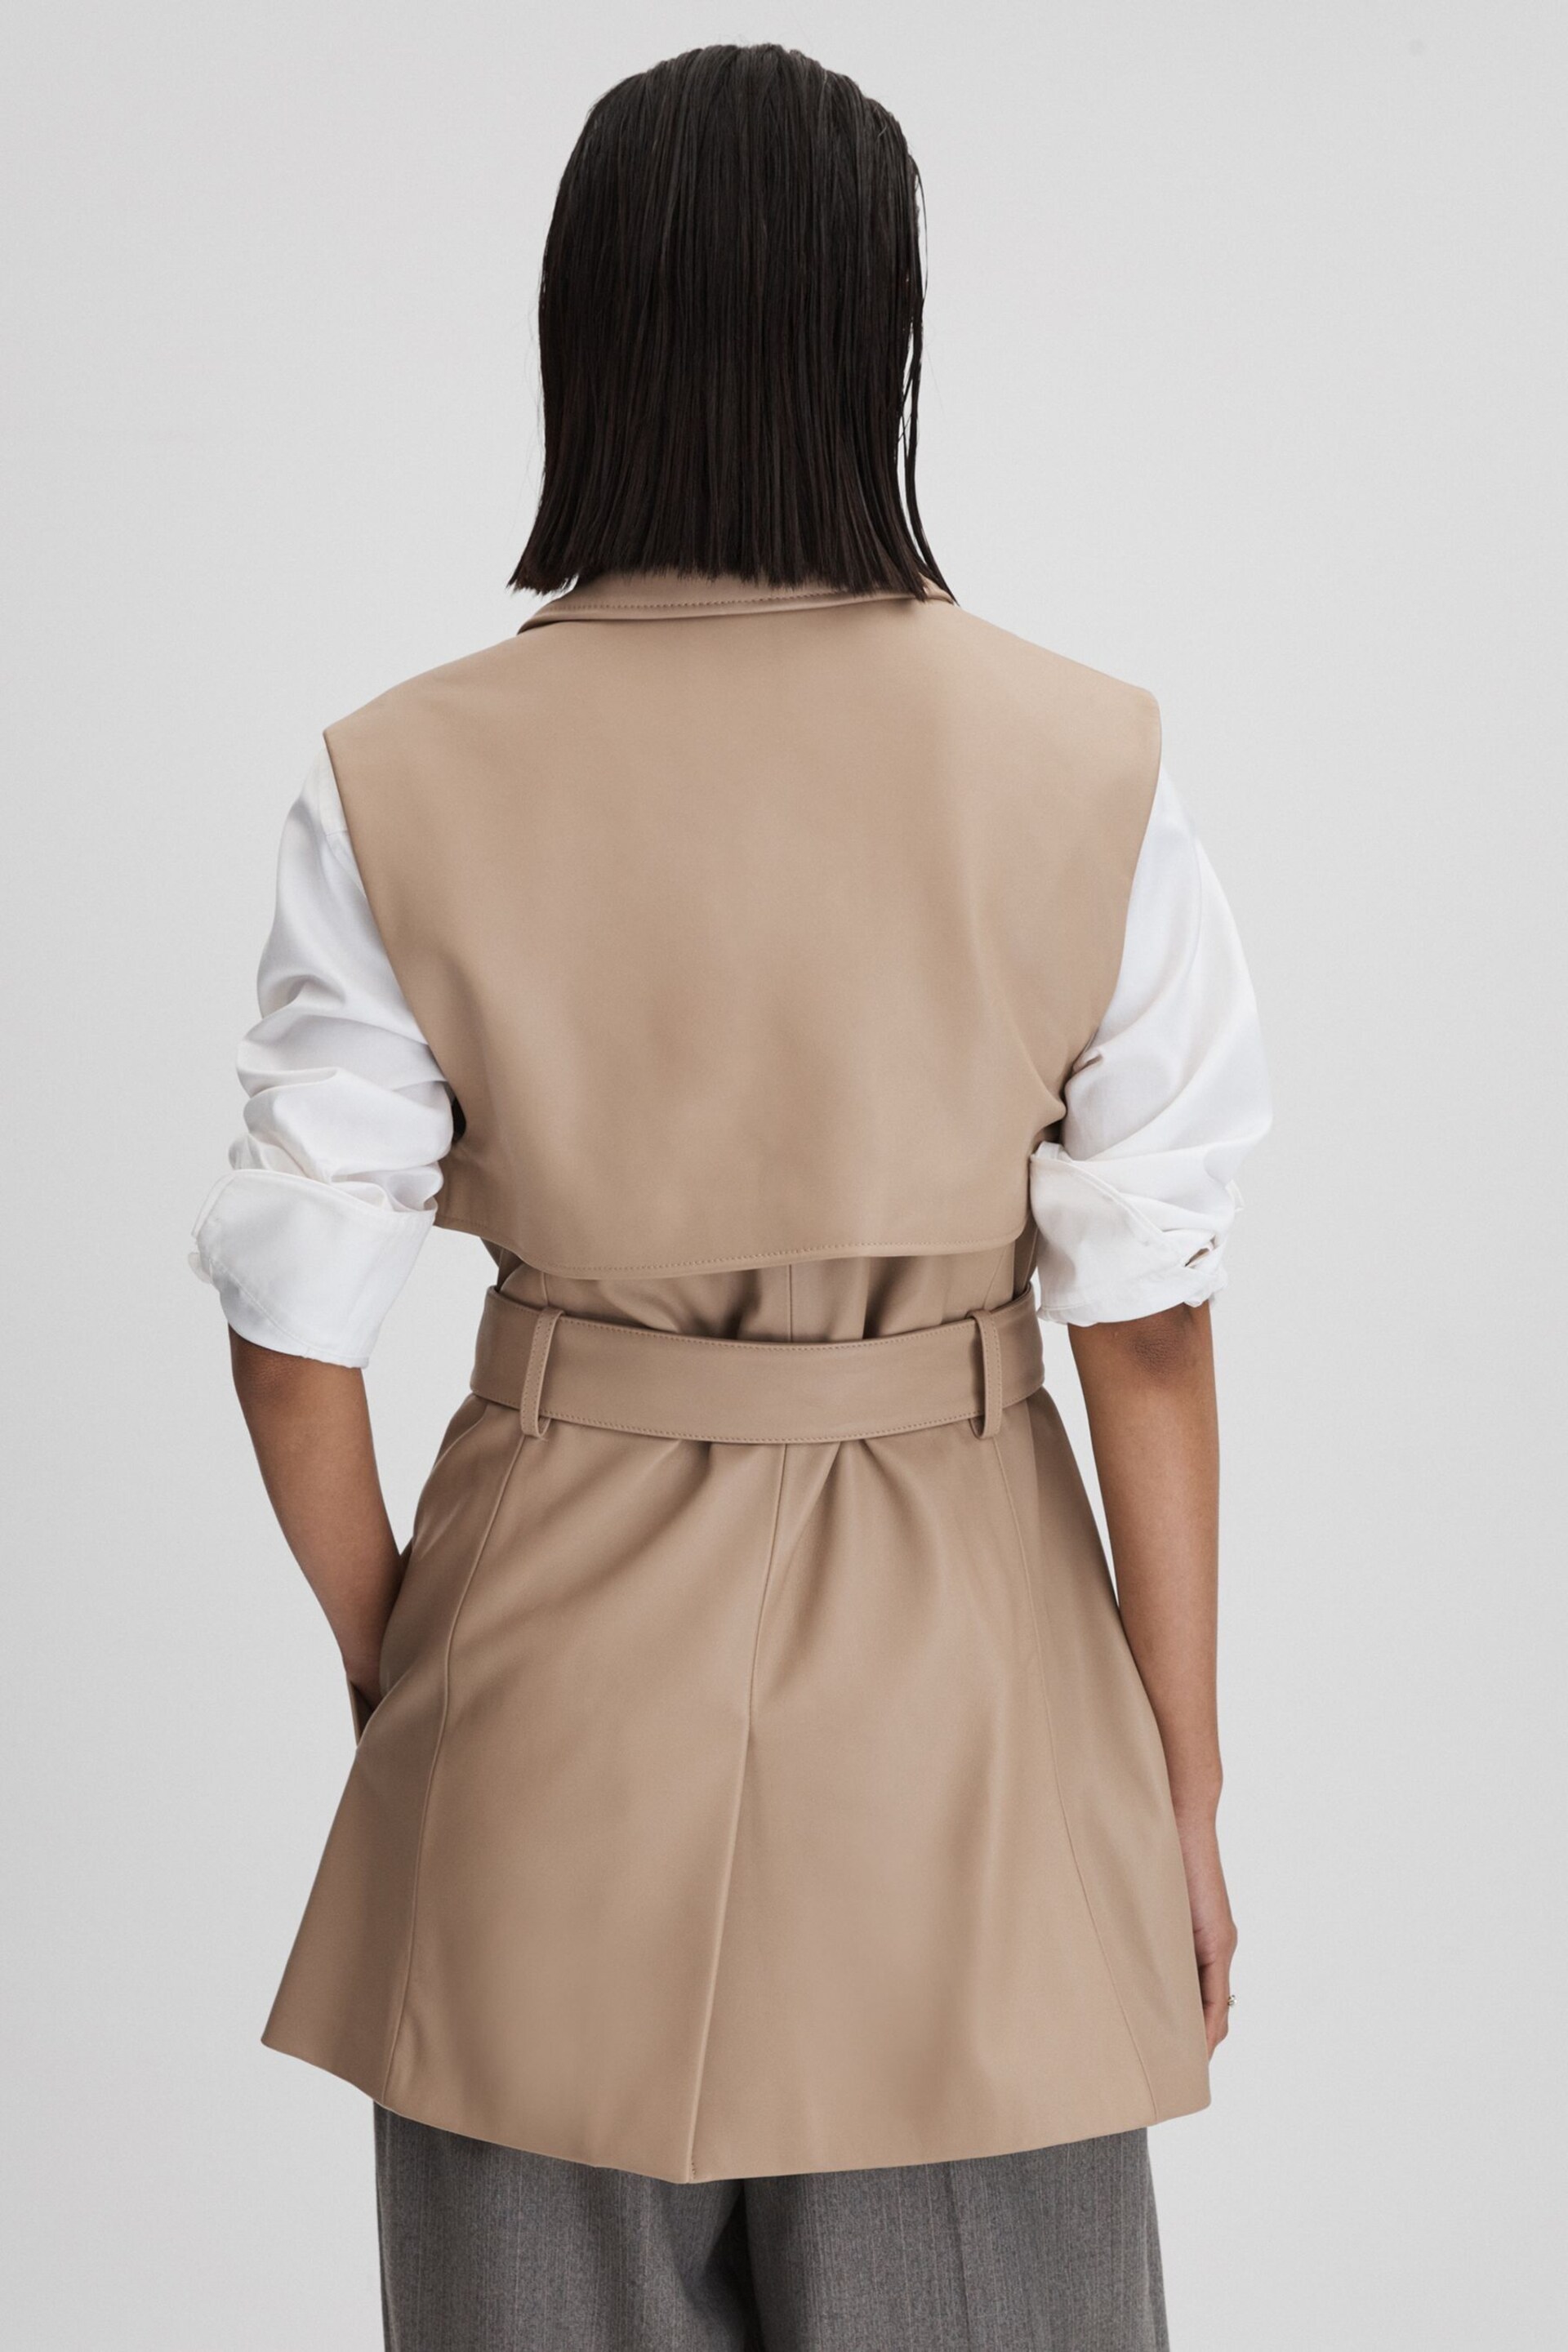 Reiss Neutral Everley Leather Double Breasted Gilet - Image 5 of 7